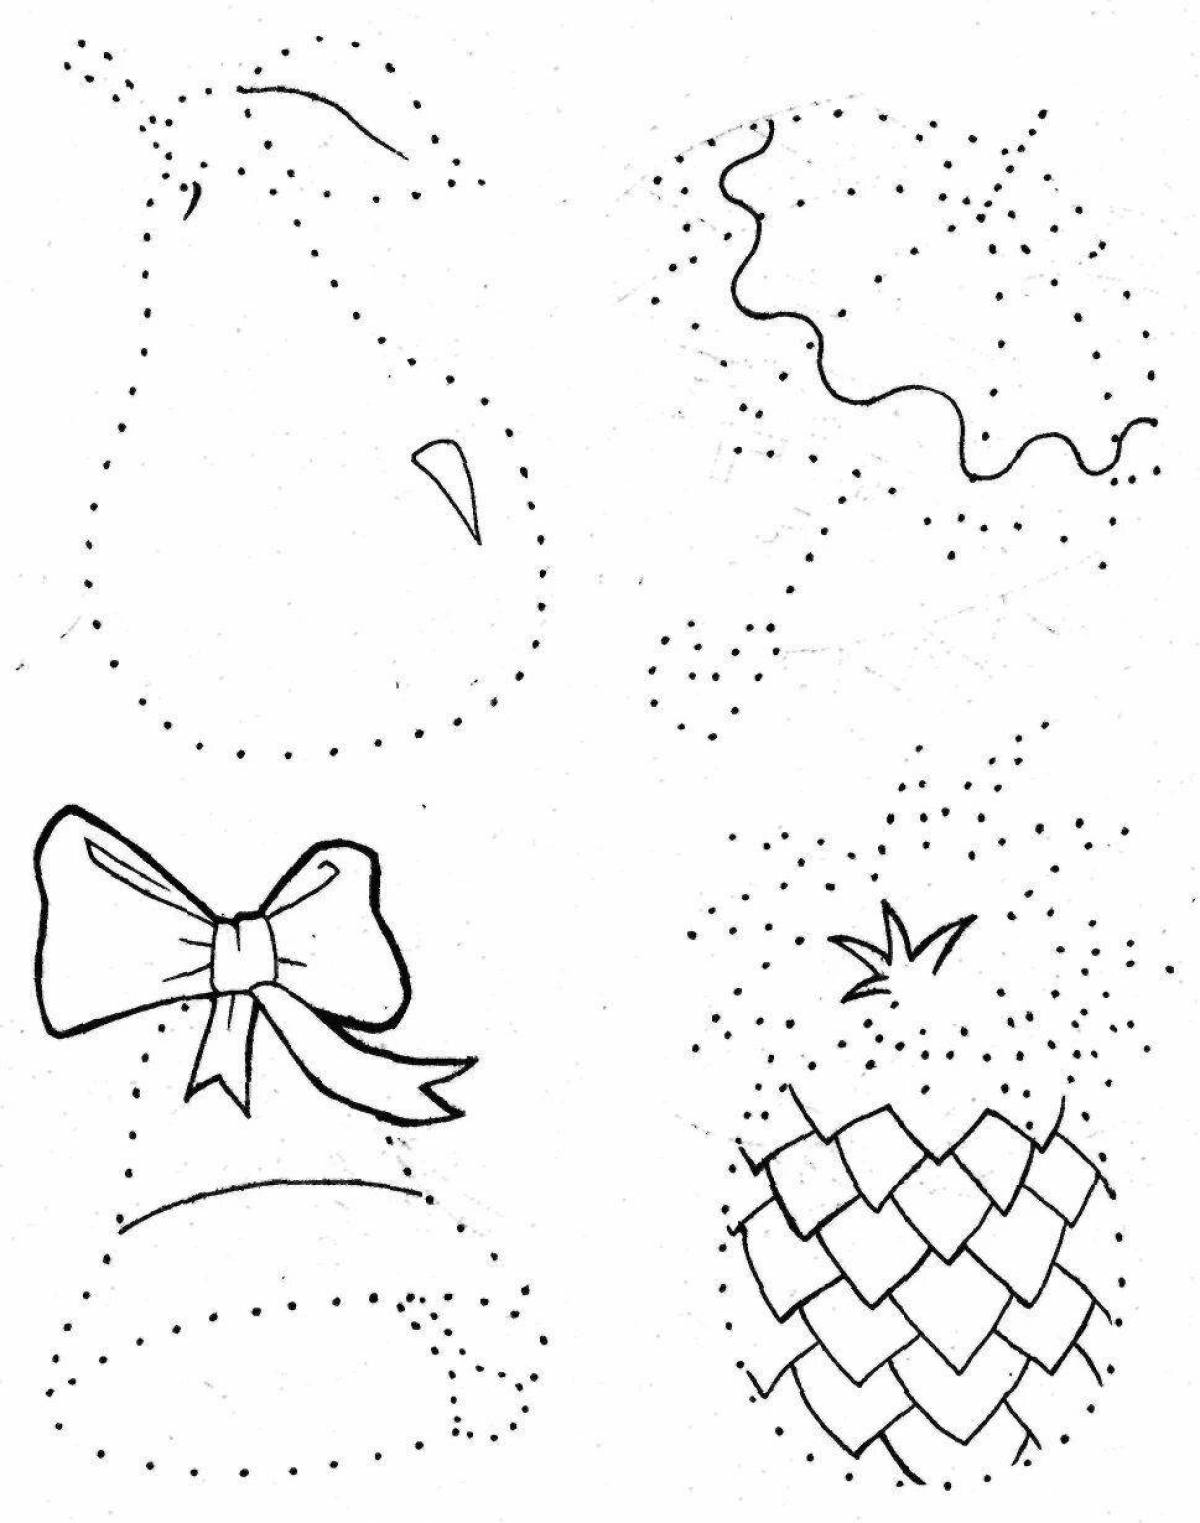 Dot-to-Dot for 5 year olds #9